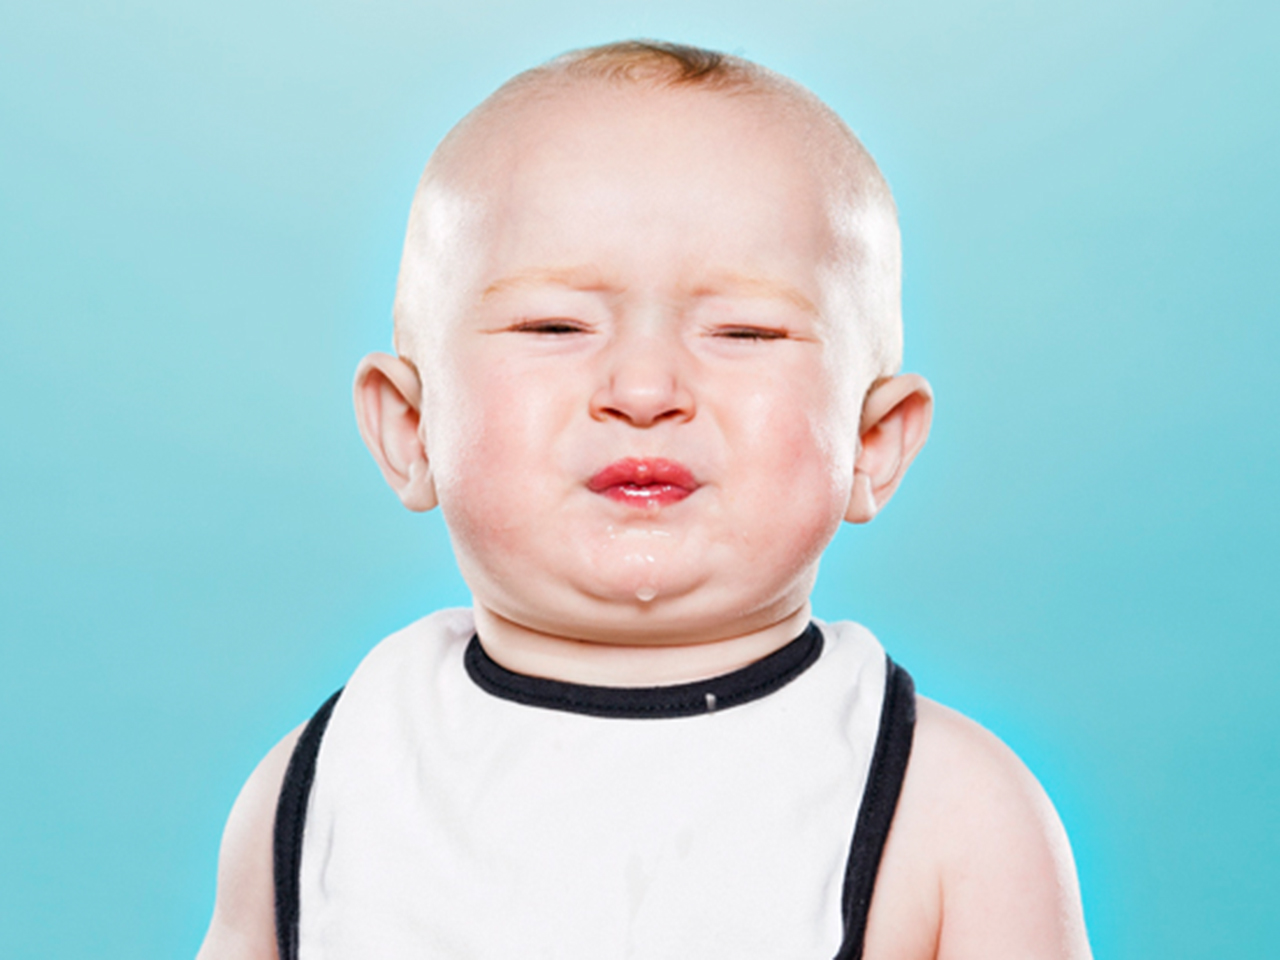 Pucker up: Kids tasting lemons for the first time